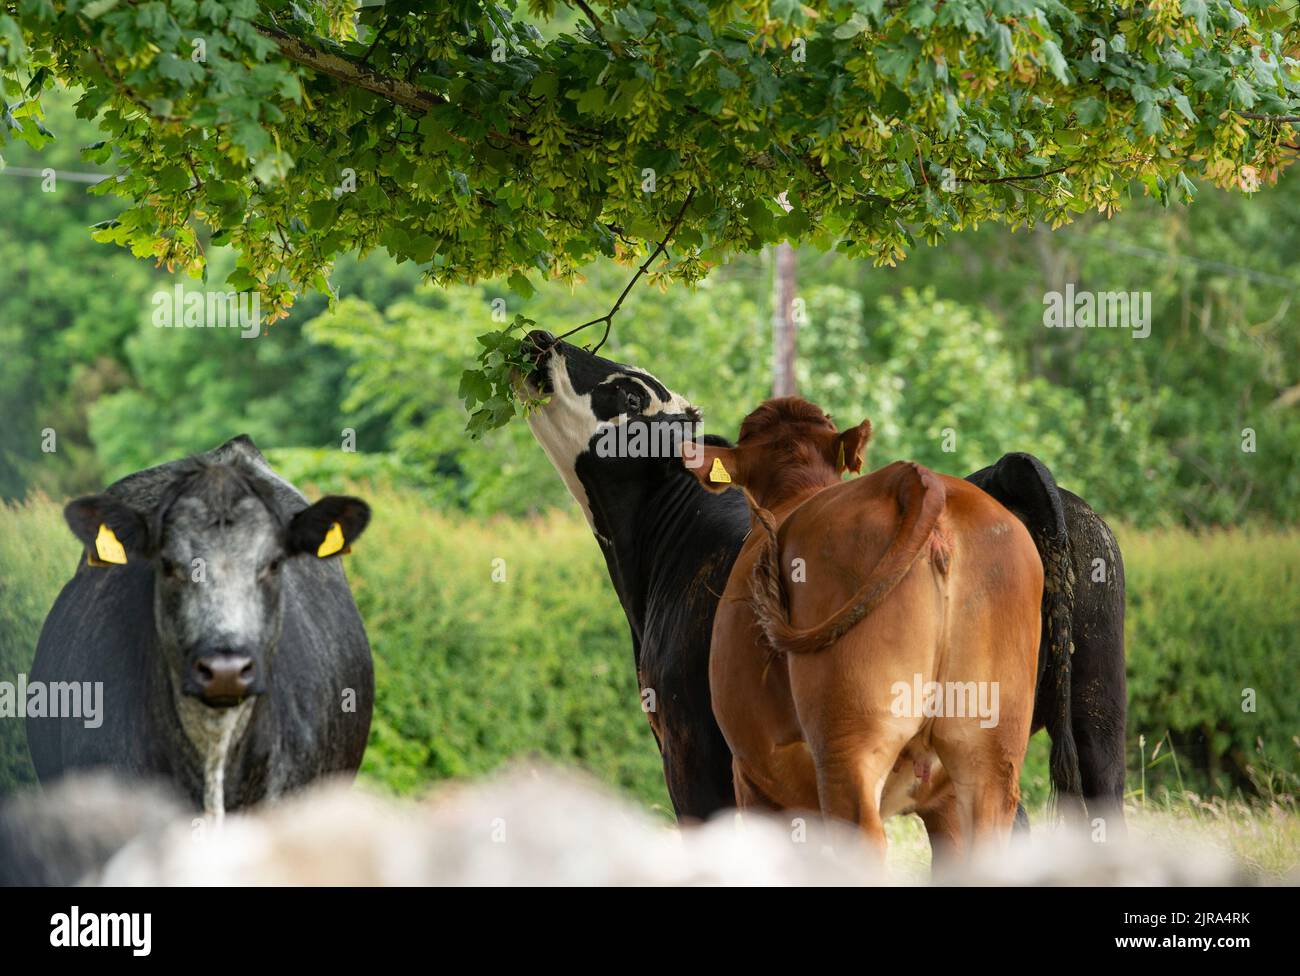 Beef cattle eating the leaves on a tree near Hawick, Scottish Borders, UK Stock Photo